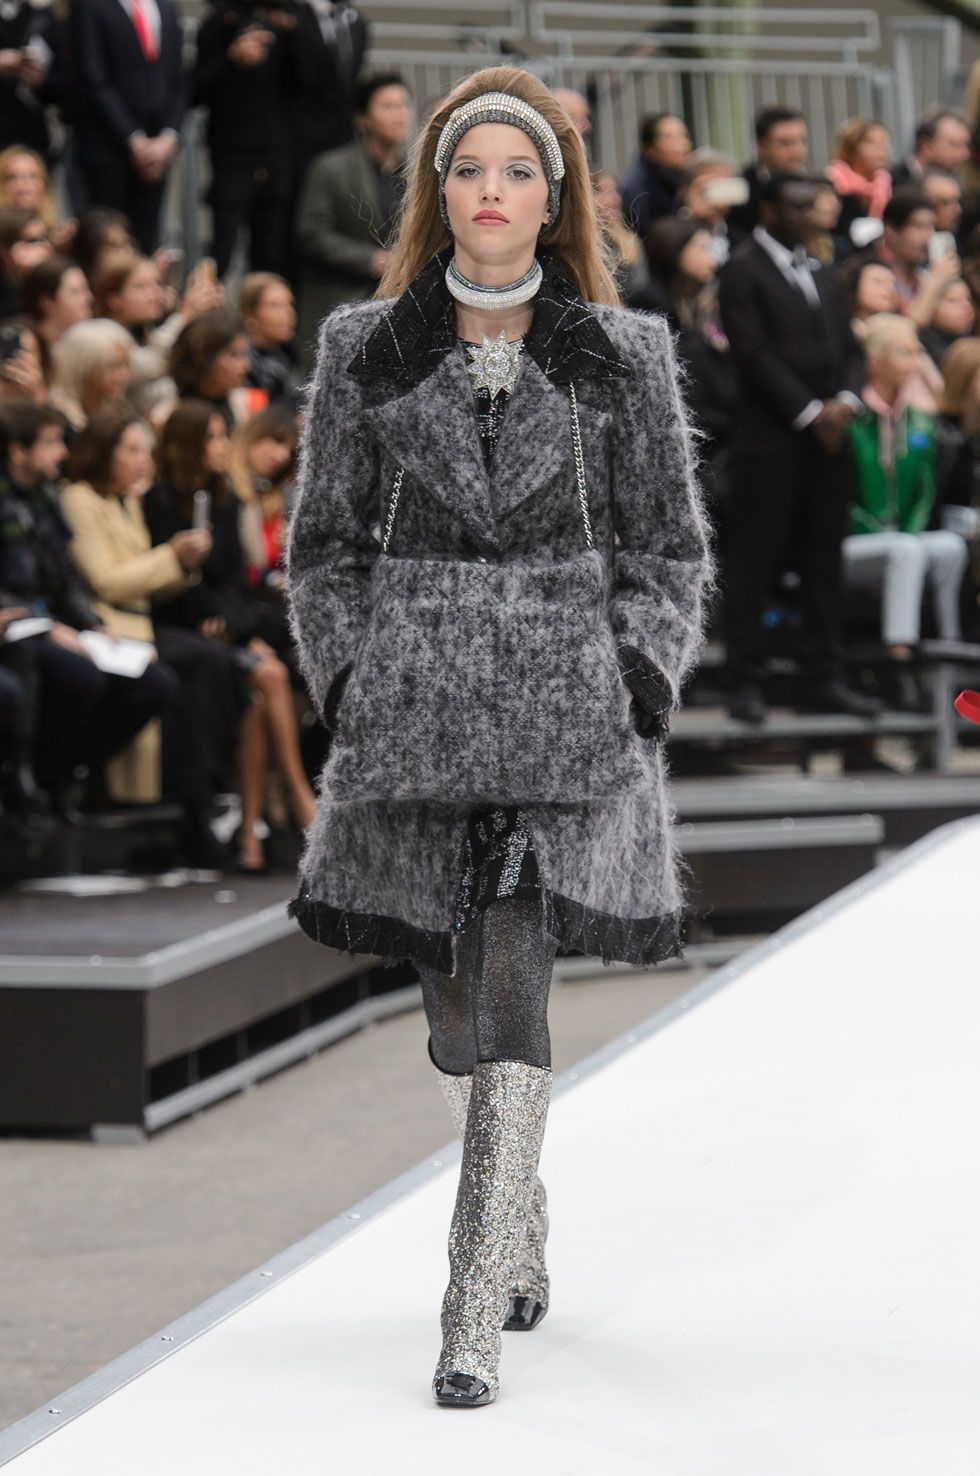 96 Looks From Chanel Fall 2017 PFW Show - Chanel Runway at Paris Fashion  Week